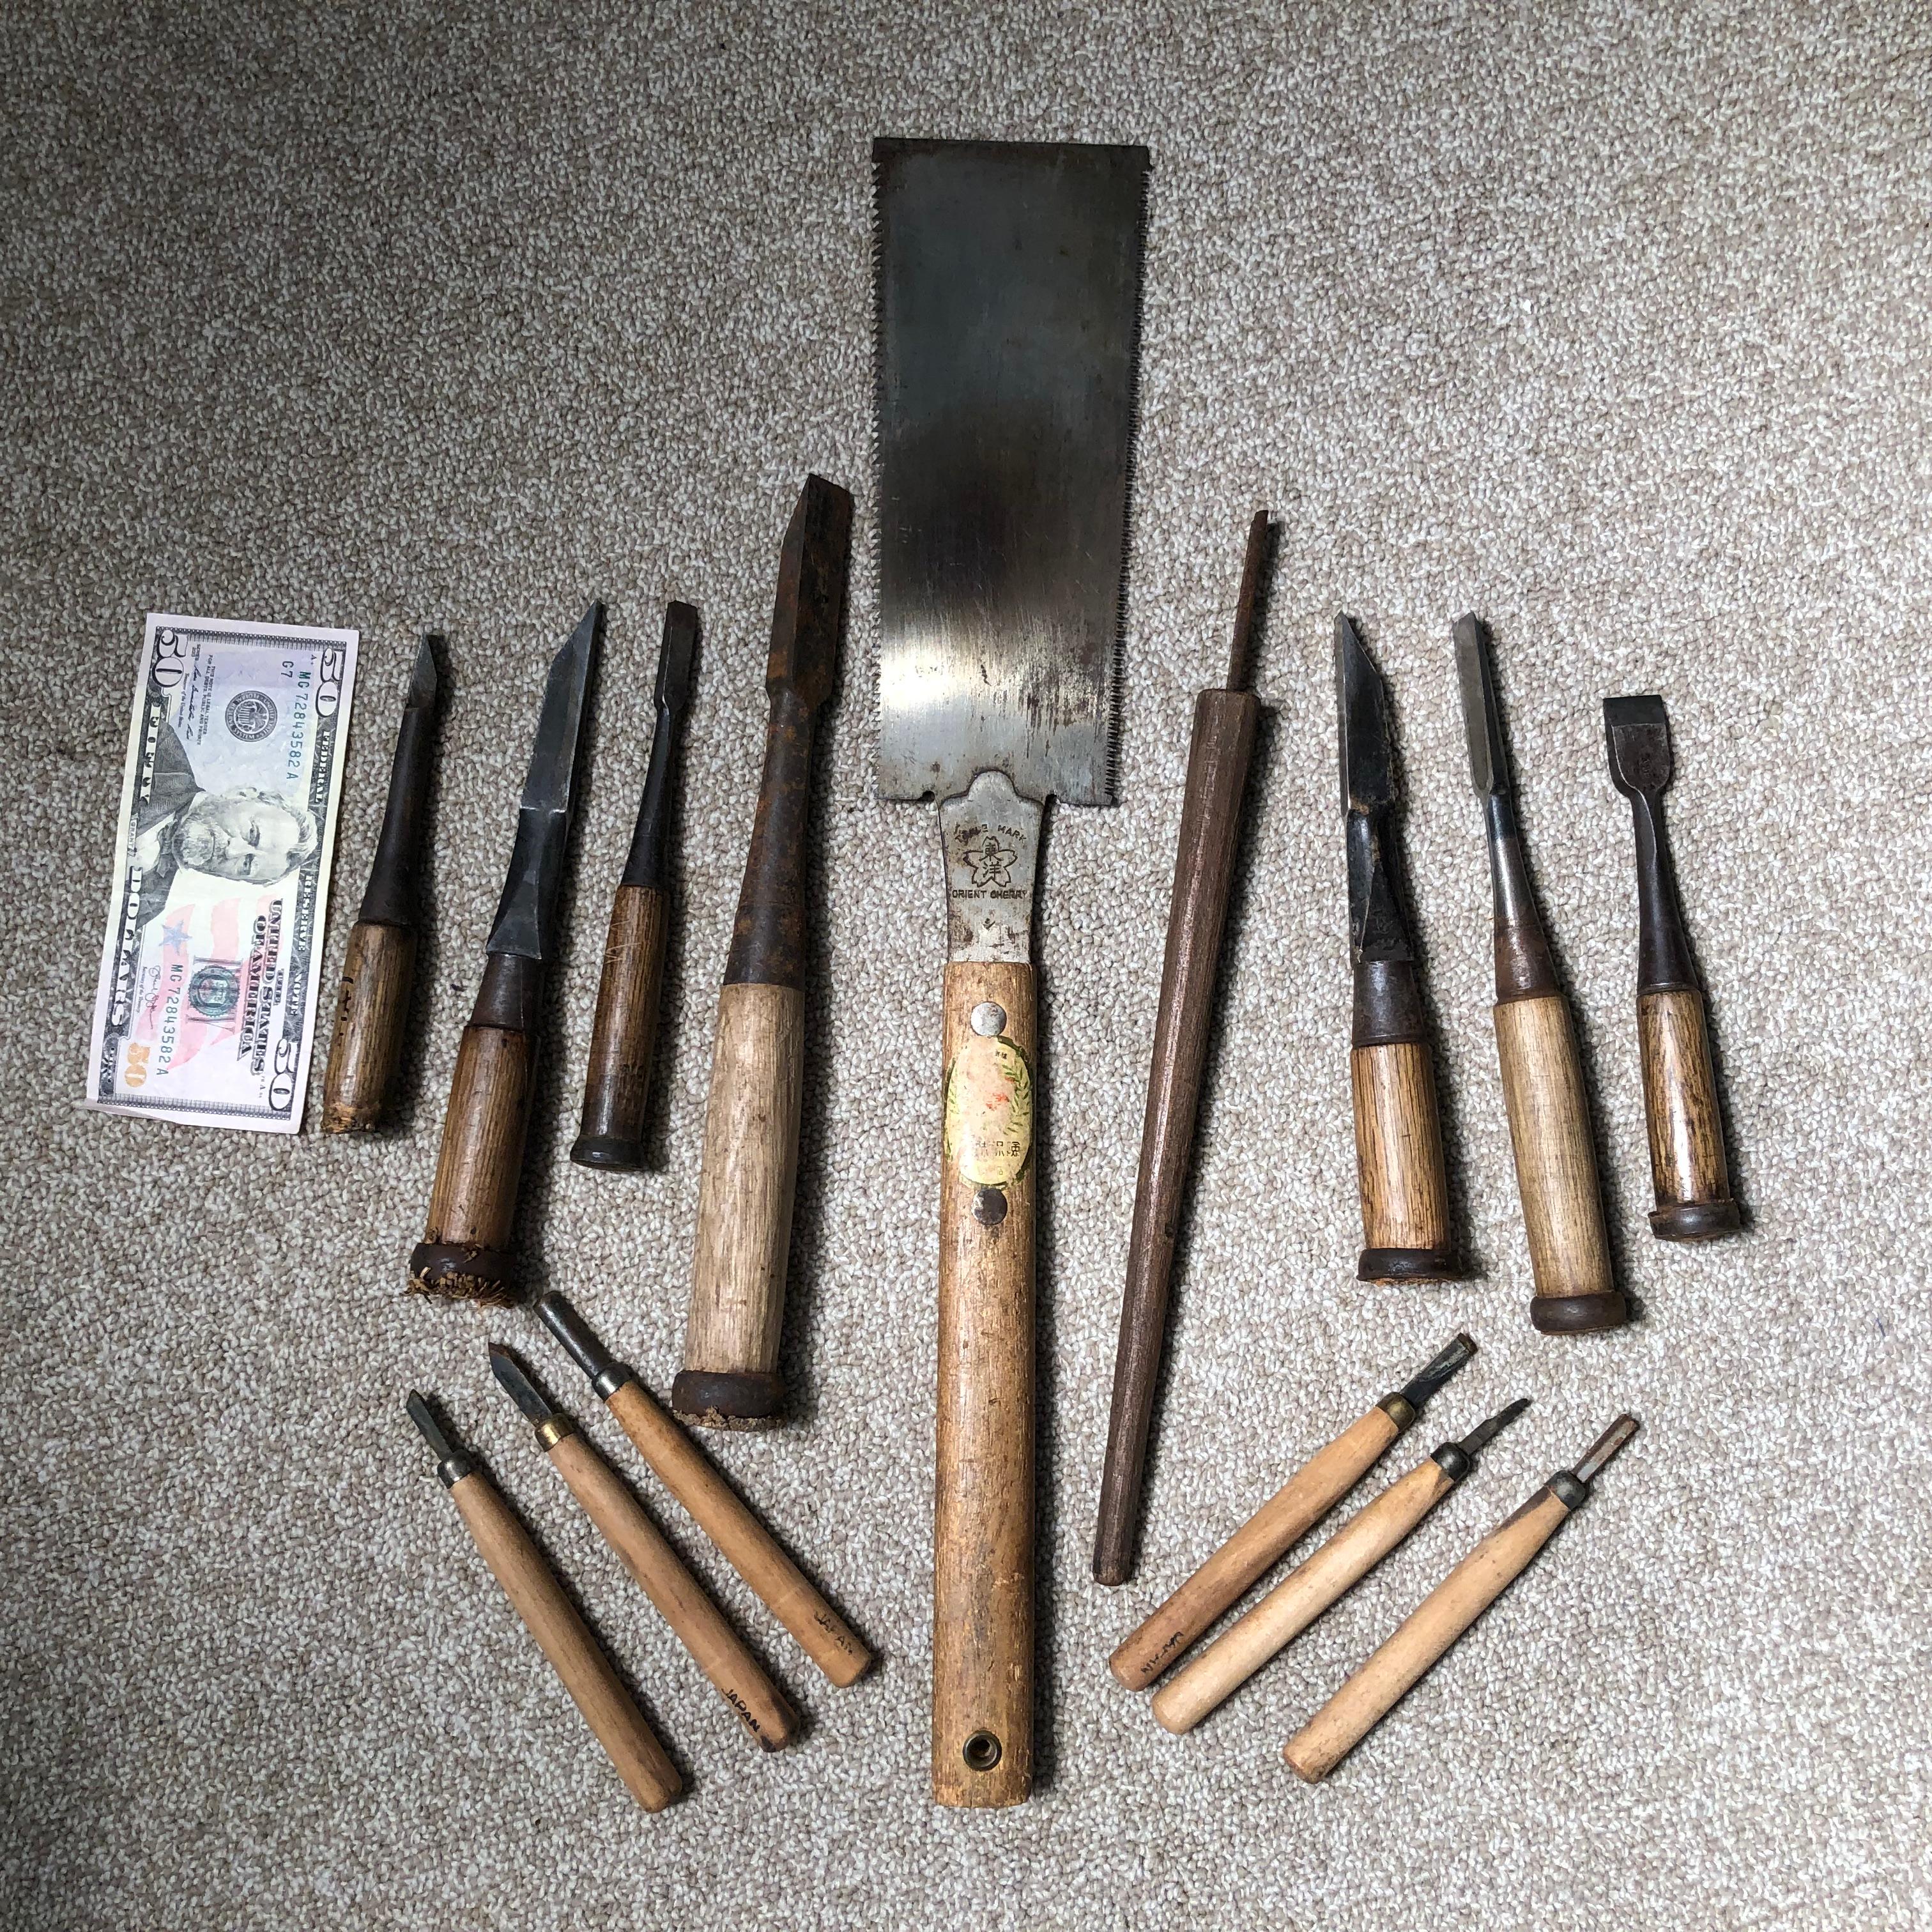 Here's a rare find from a collector we visited in Japan. A very unusual treasure from Japan. 

This is a cache of 15 Old antique Japanese professional carpenter's wood tools including a fine 19.5 inch signed saw, plus 14 various old antique